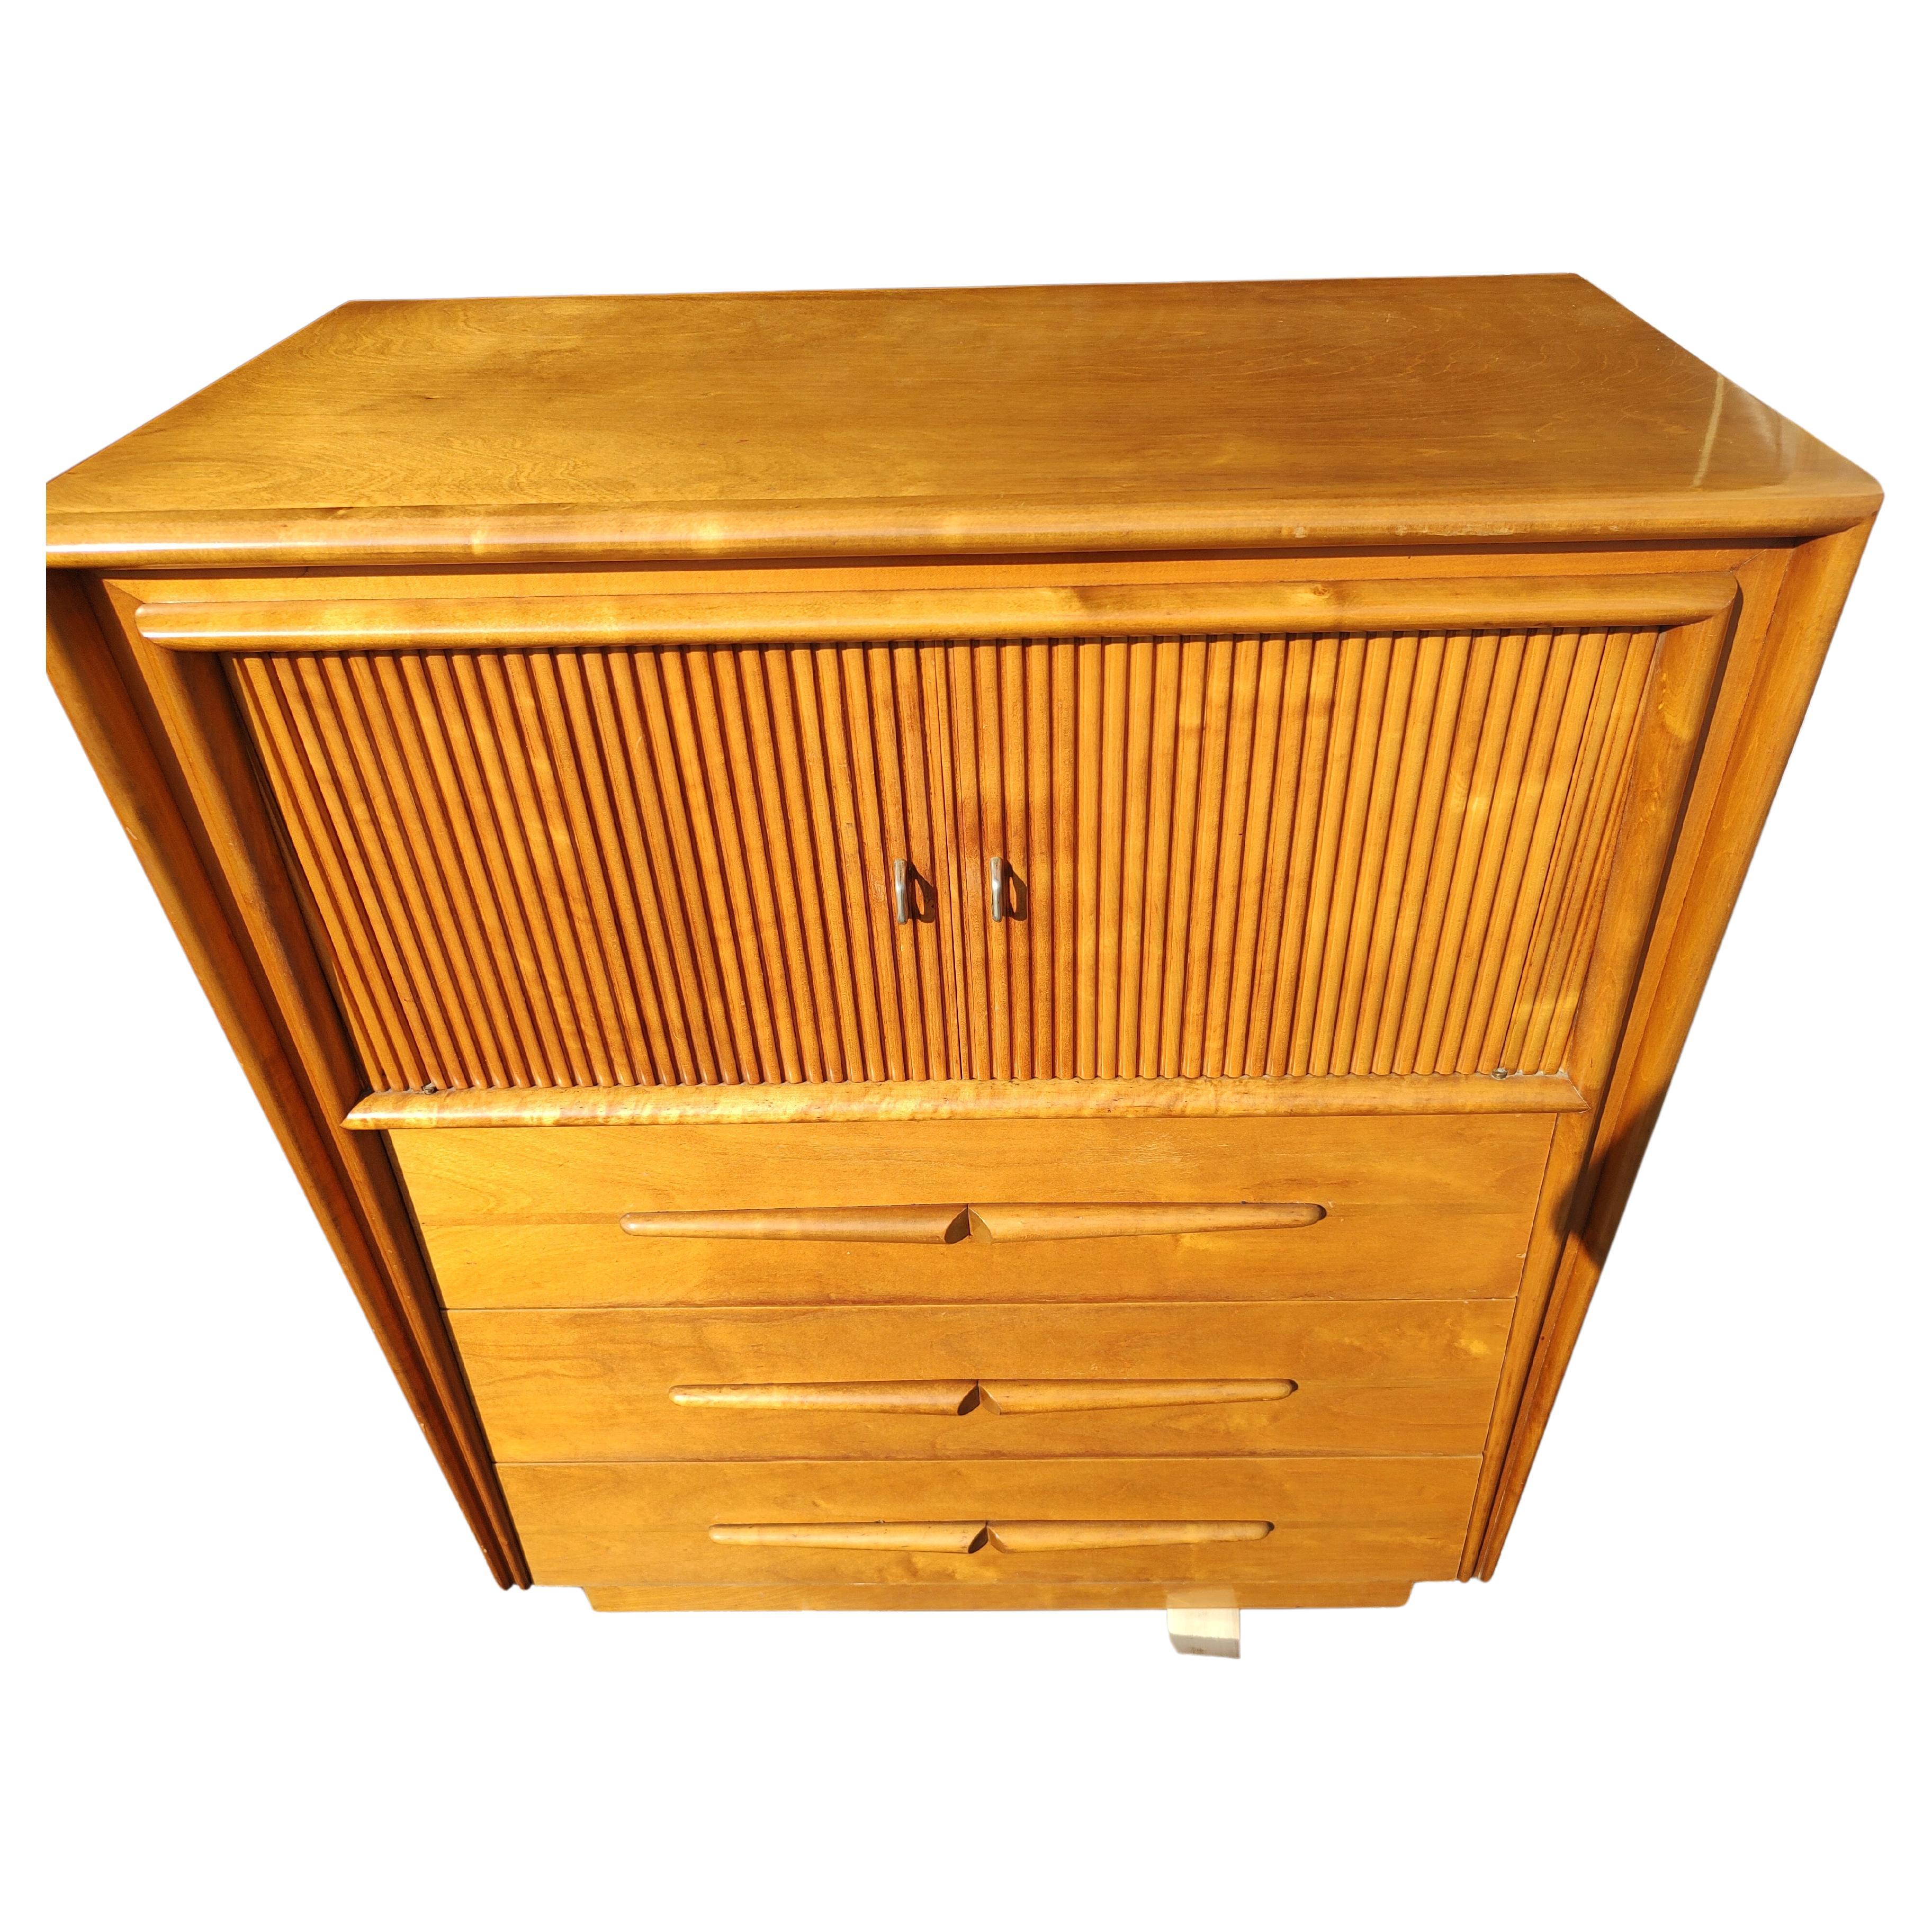 Fantastic simple and elegant 3 drawer dresser with a two door cabinet above. Have the original paperwork from its sale, original and only owners. In excellent vintage condition with minimal wear, original finish with a little tuneup. Drawers glide